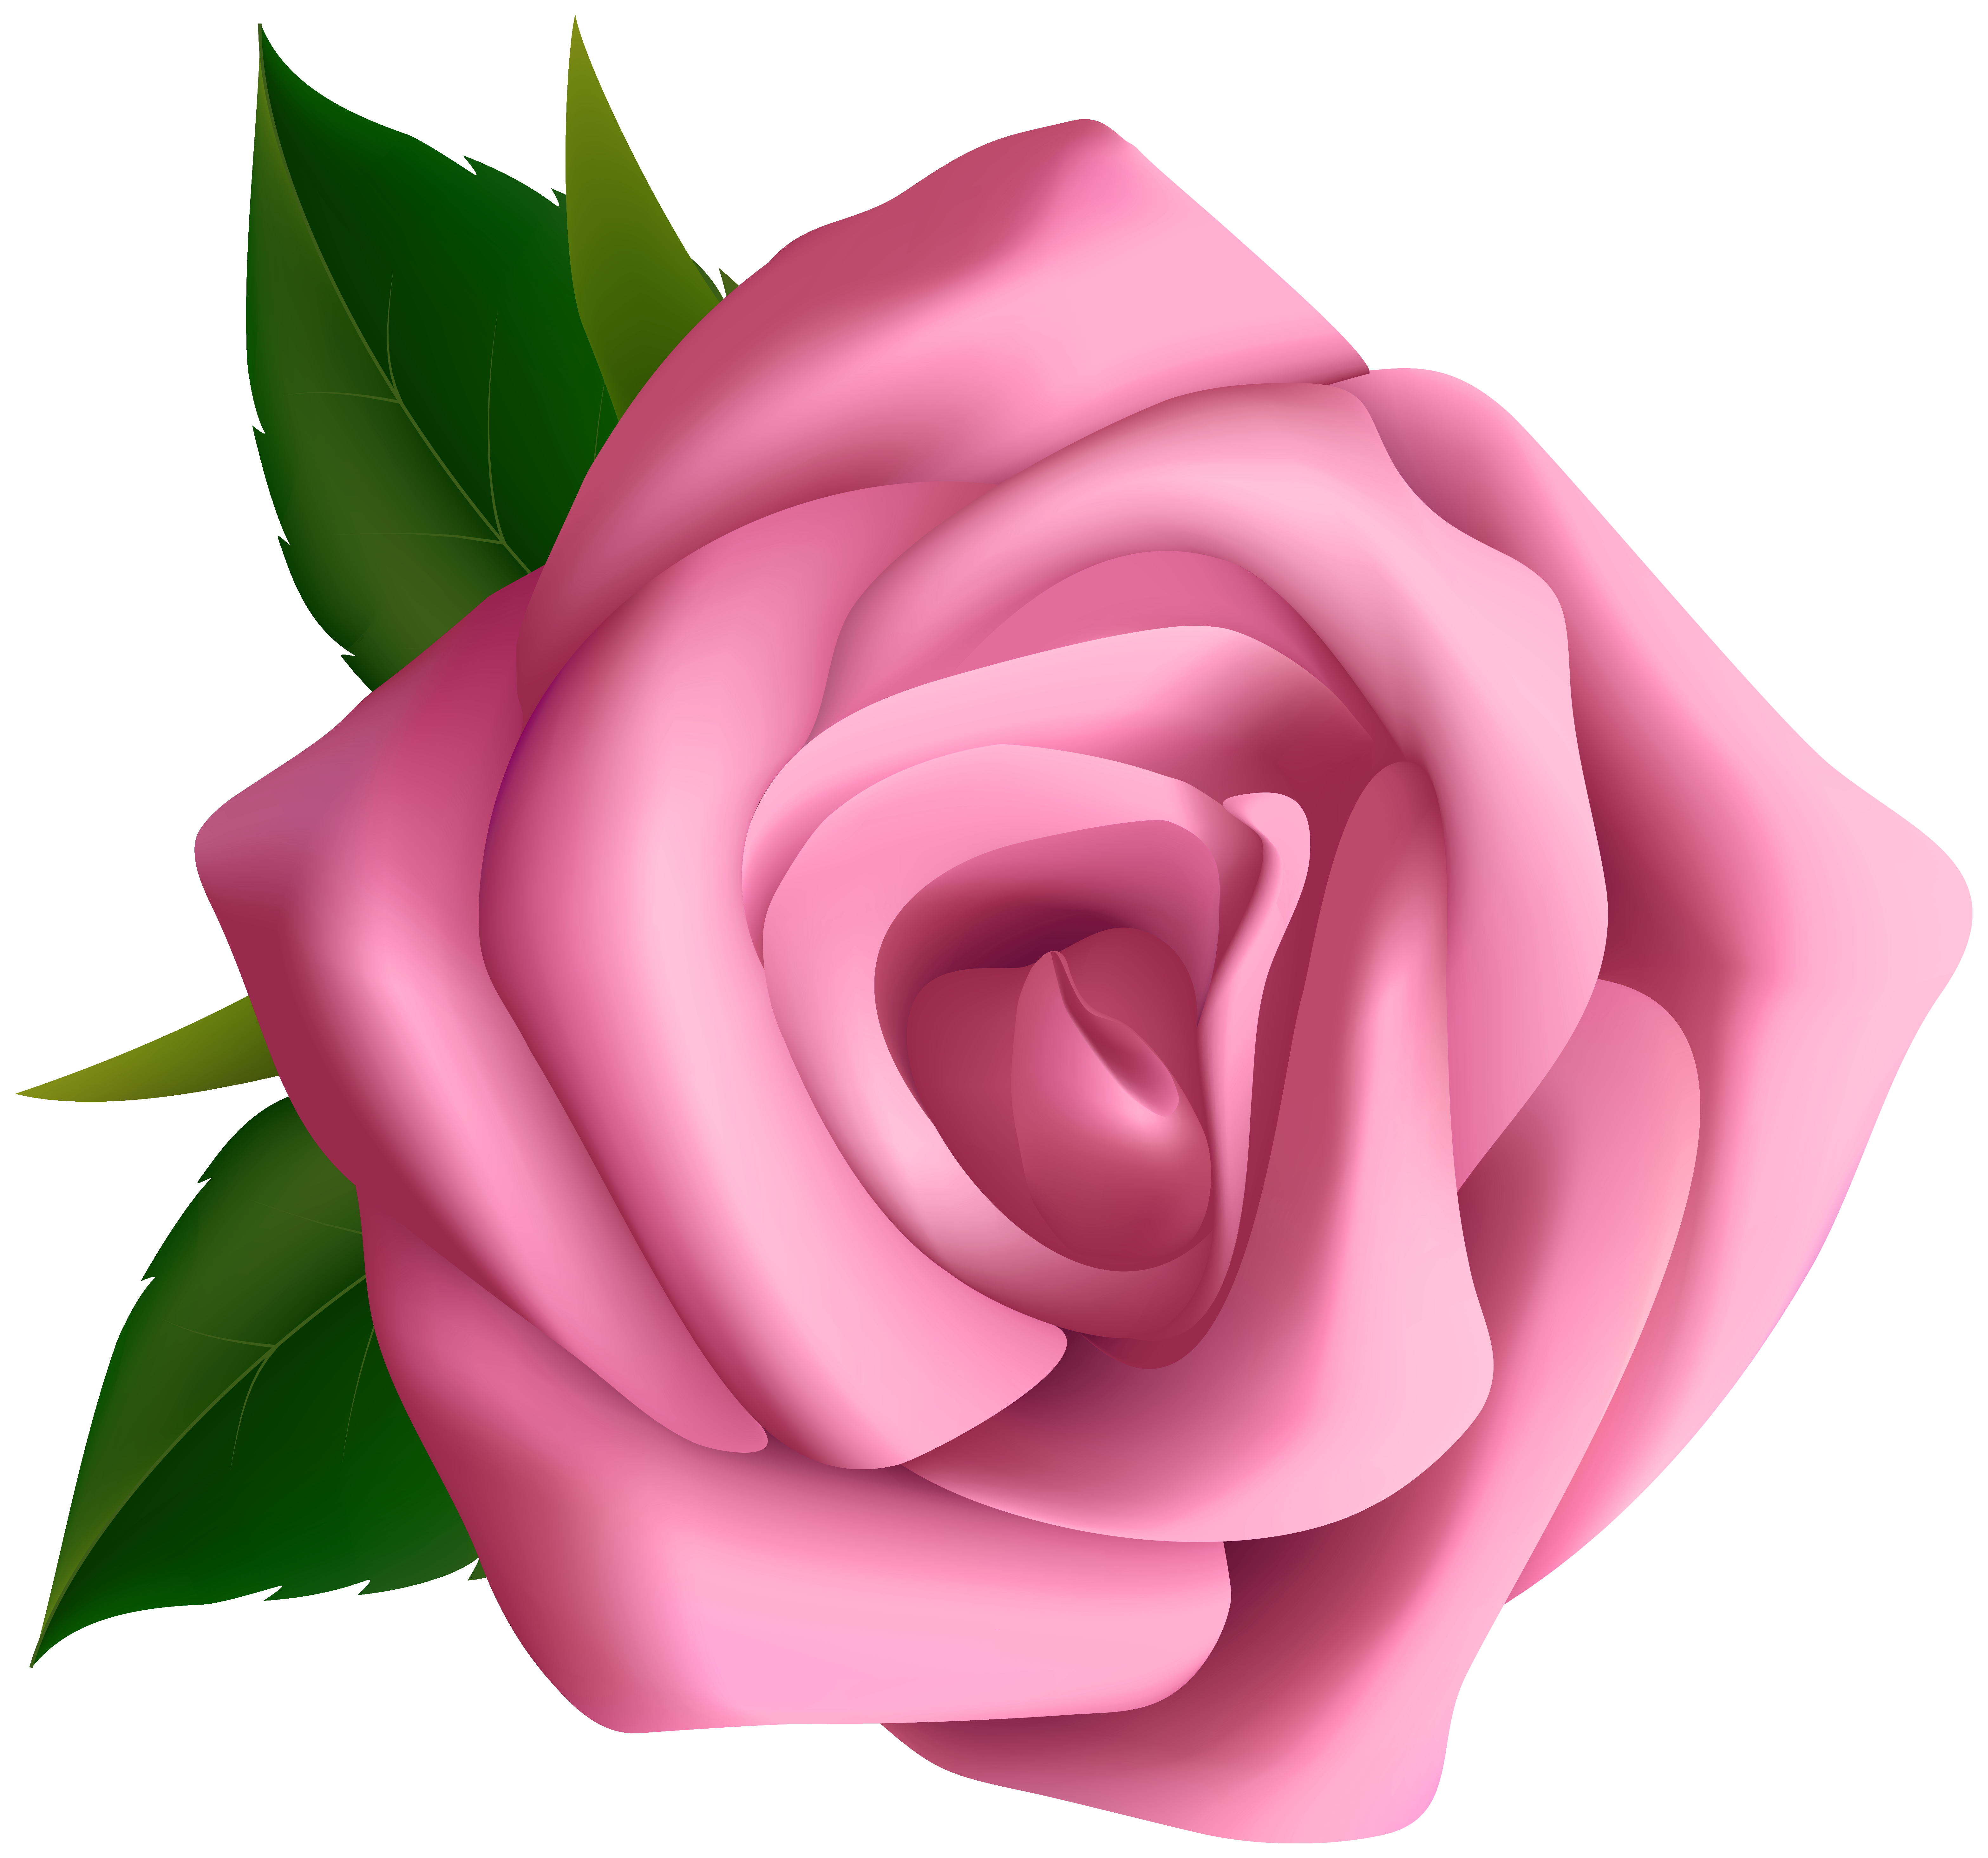 Large pink rose clipart blumen pink roses clip cliparting.